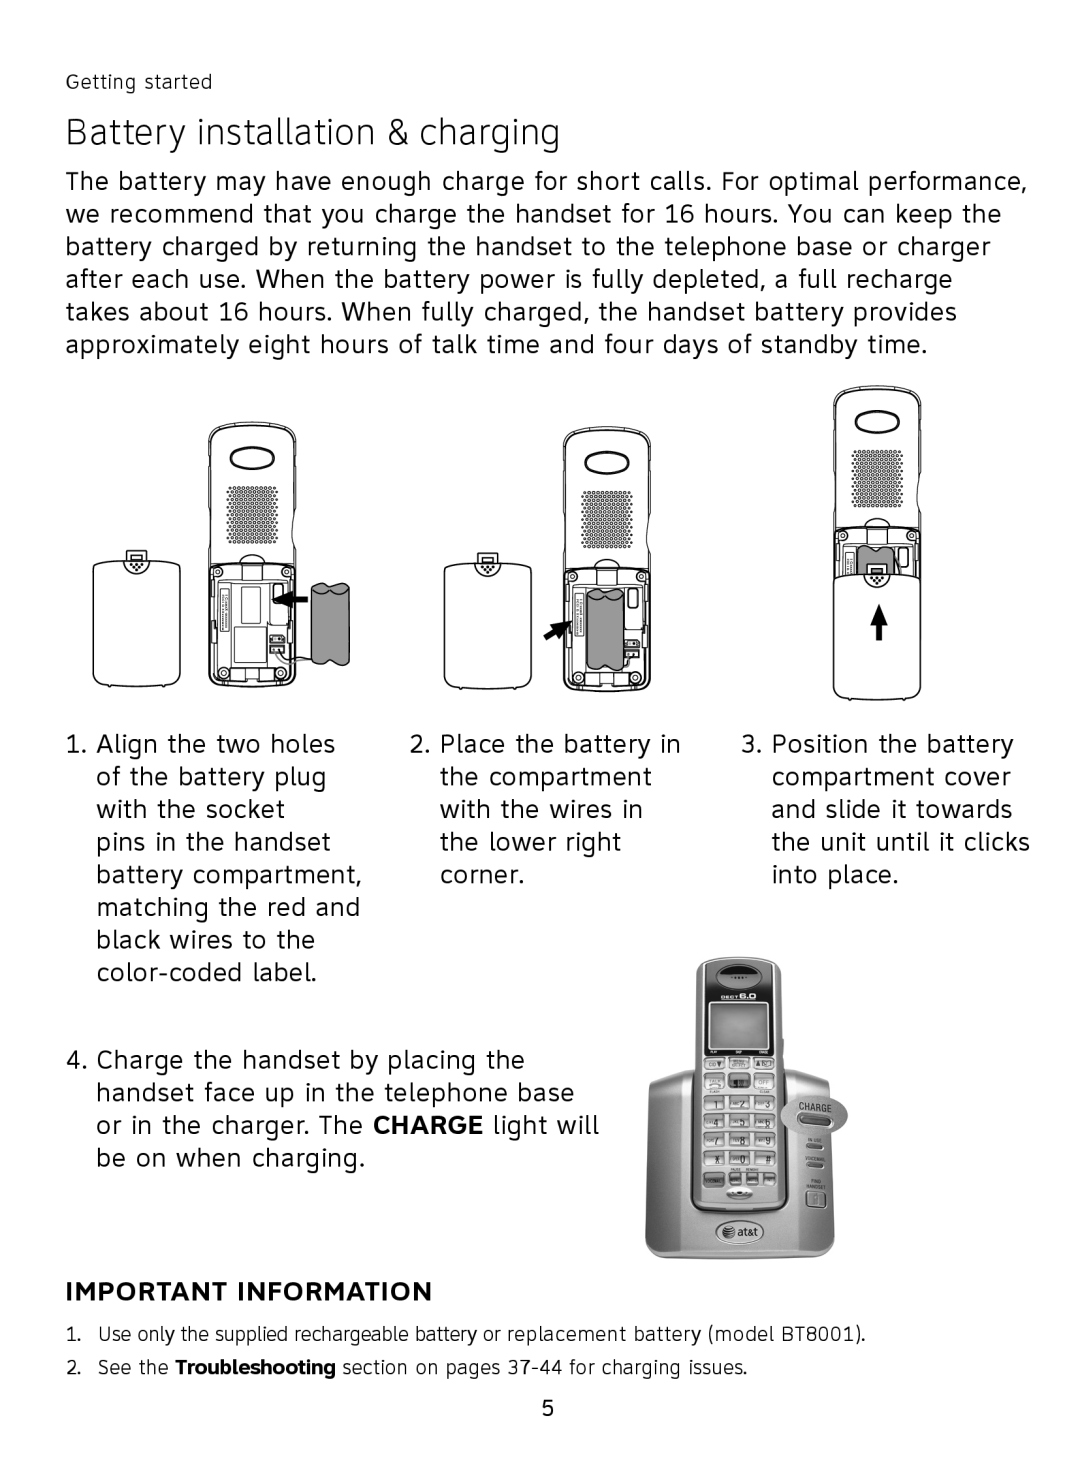 AT&T AT3111-2 user manual Battery installation & charging, Important Information 